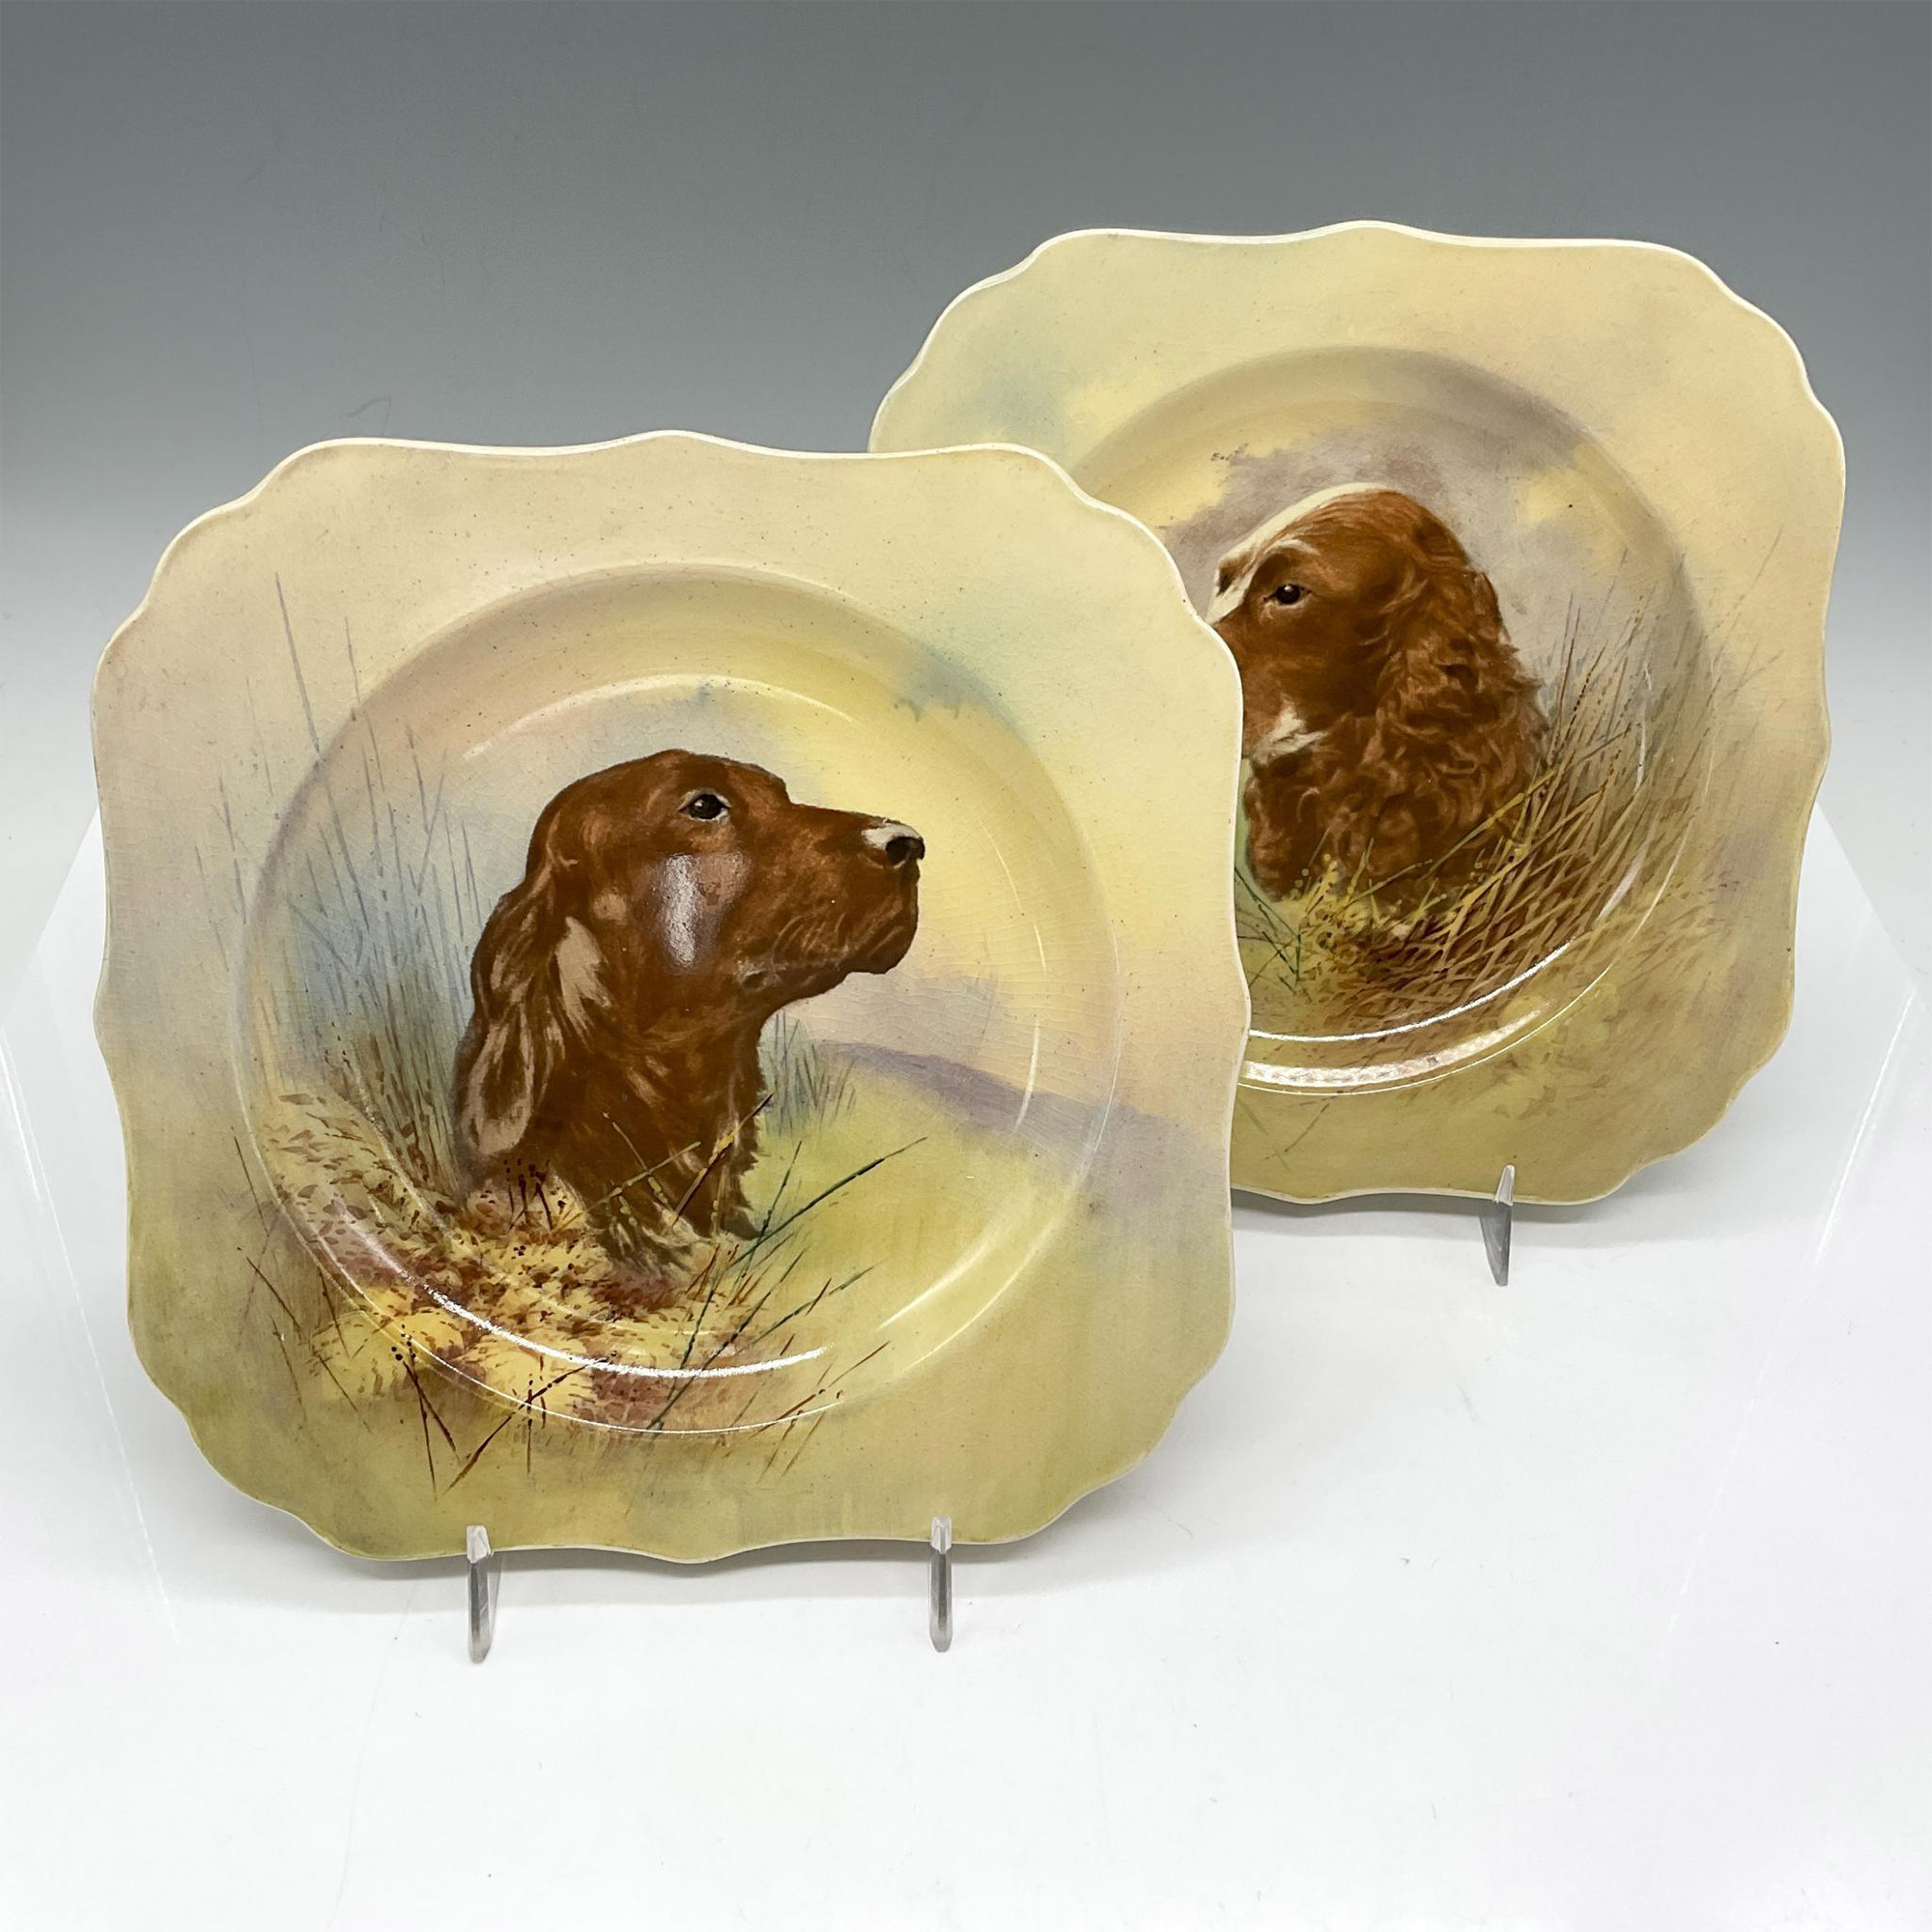 2pc Royal Doulton Series Ware Plates, Dog's Heads - Image 2 of 3